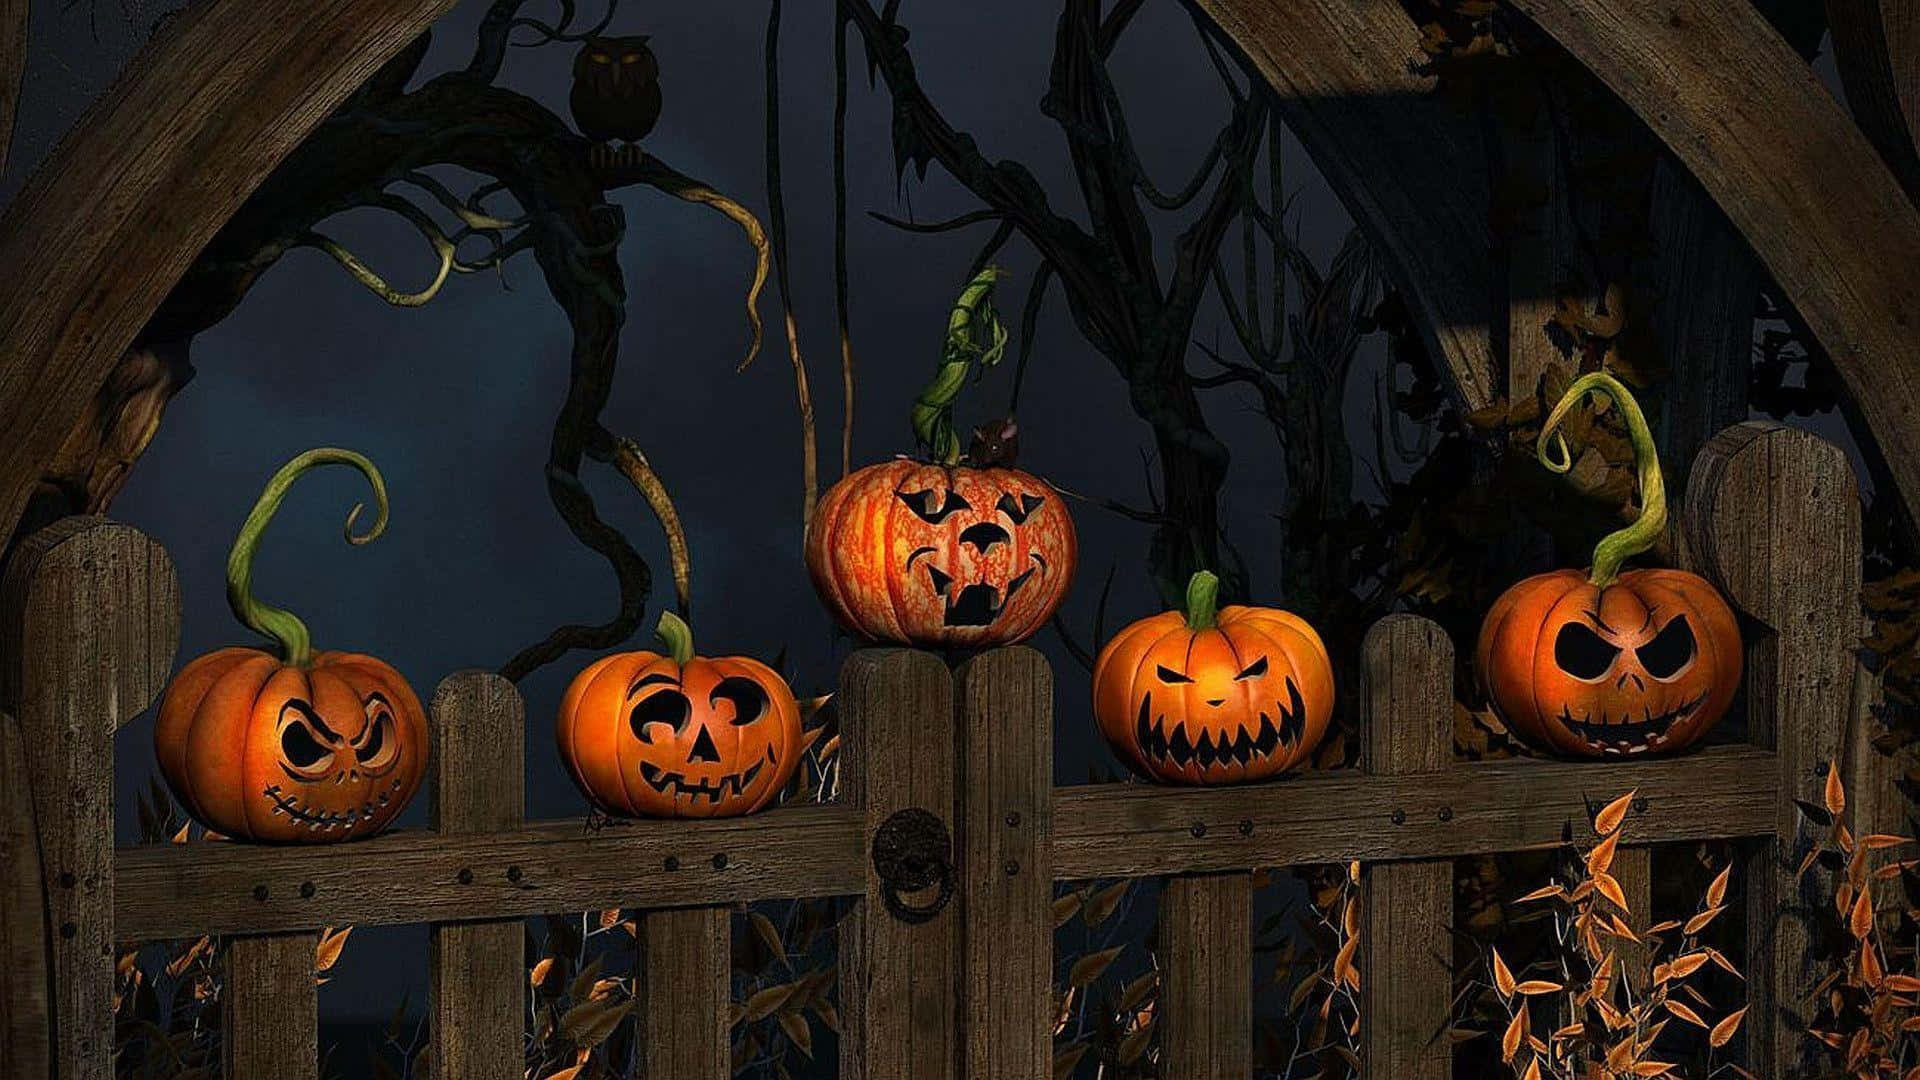 Get ready to be spooked with this scary Halloween prop Wallpaper